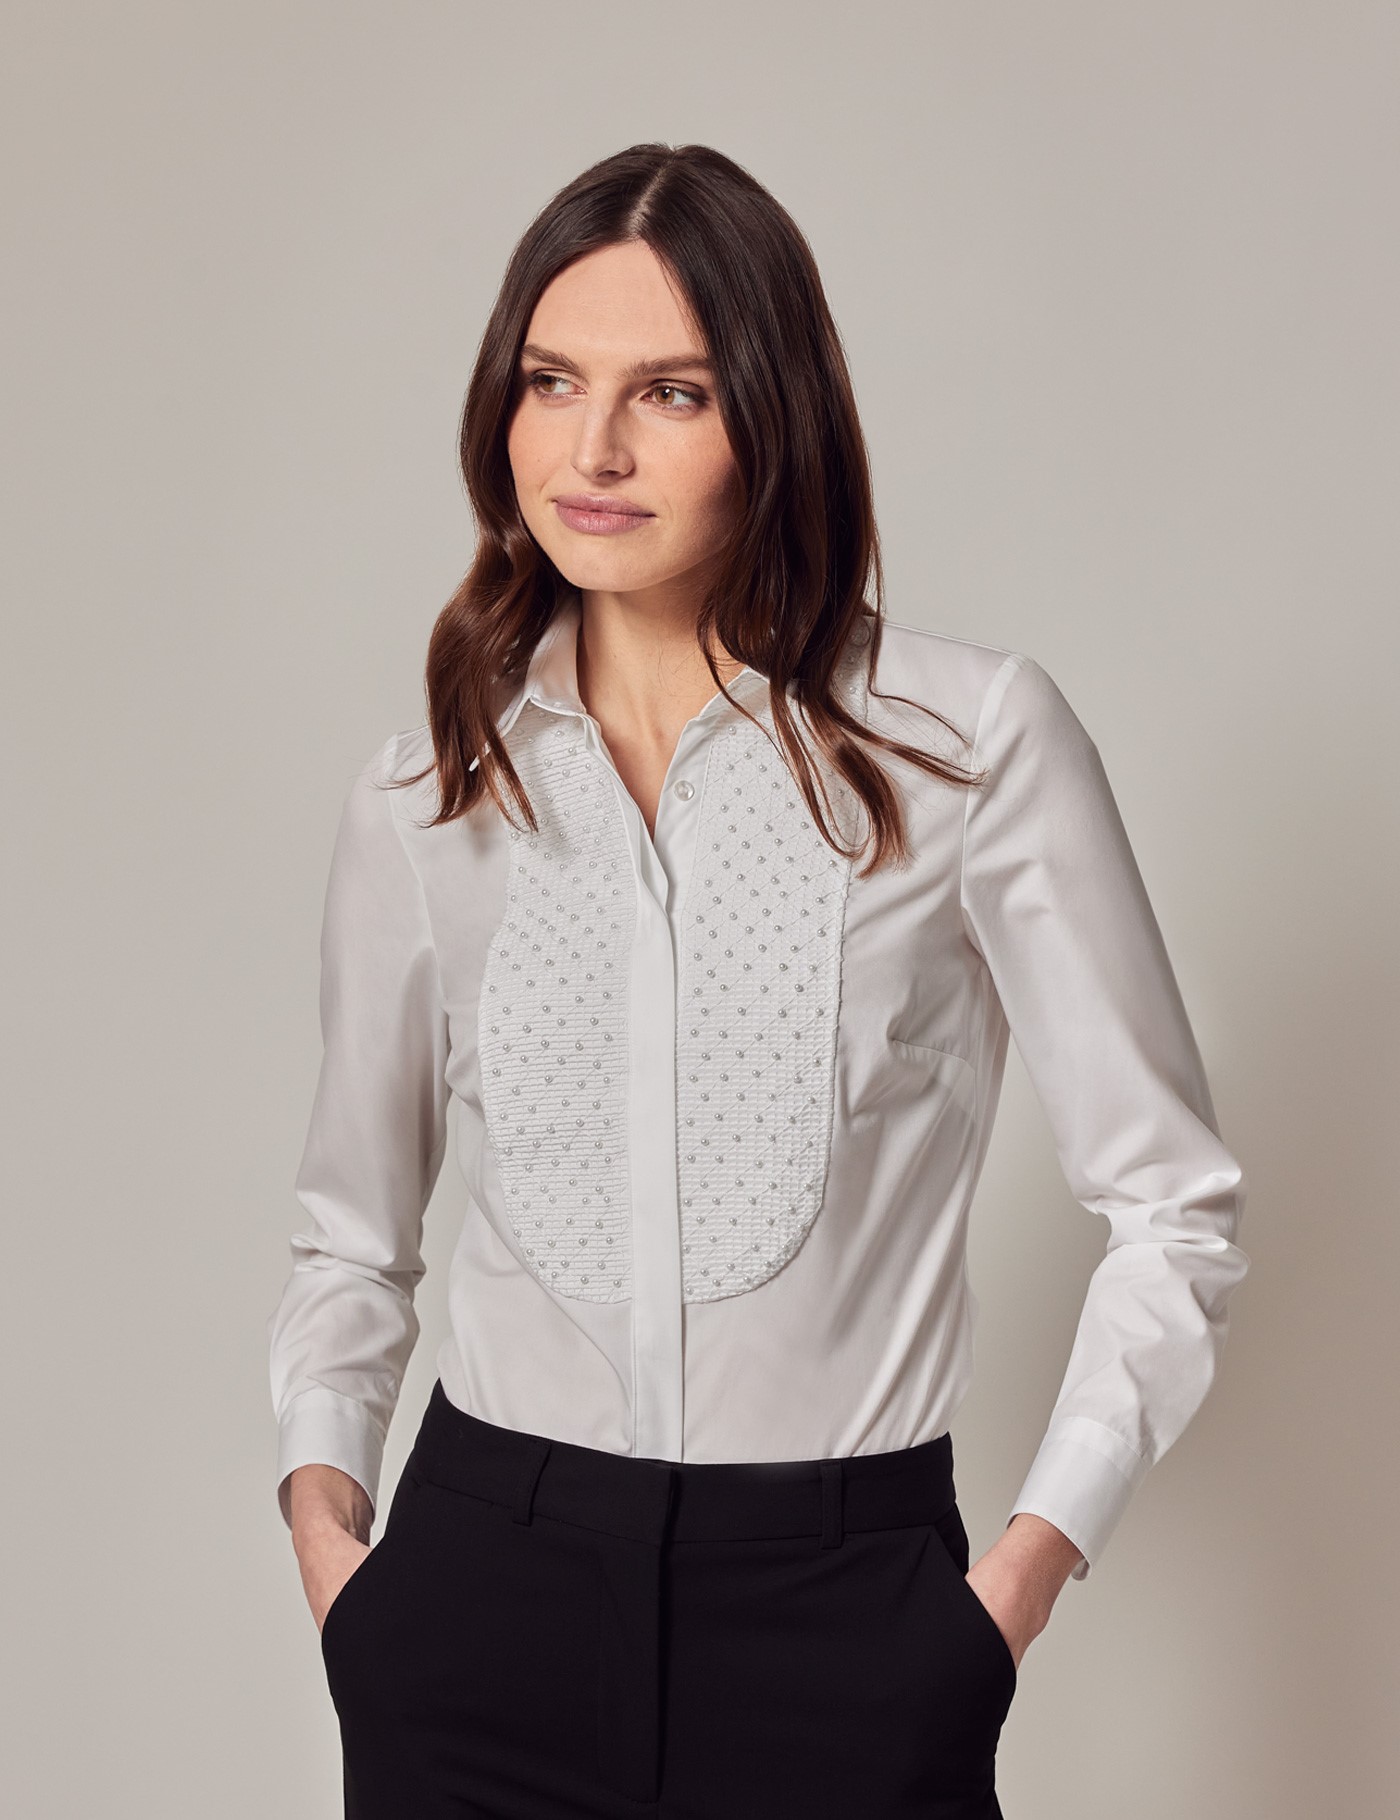 Women's White Semi Fitted Boutique Shirt with Pearl Embellishments ...